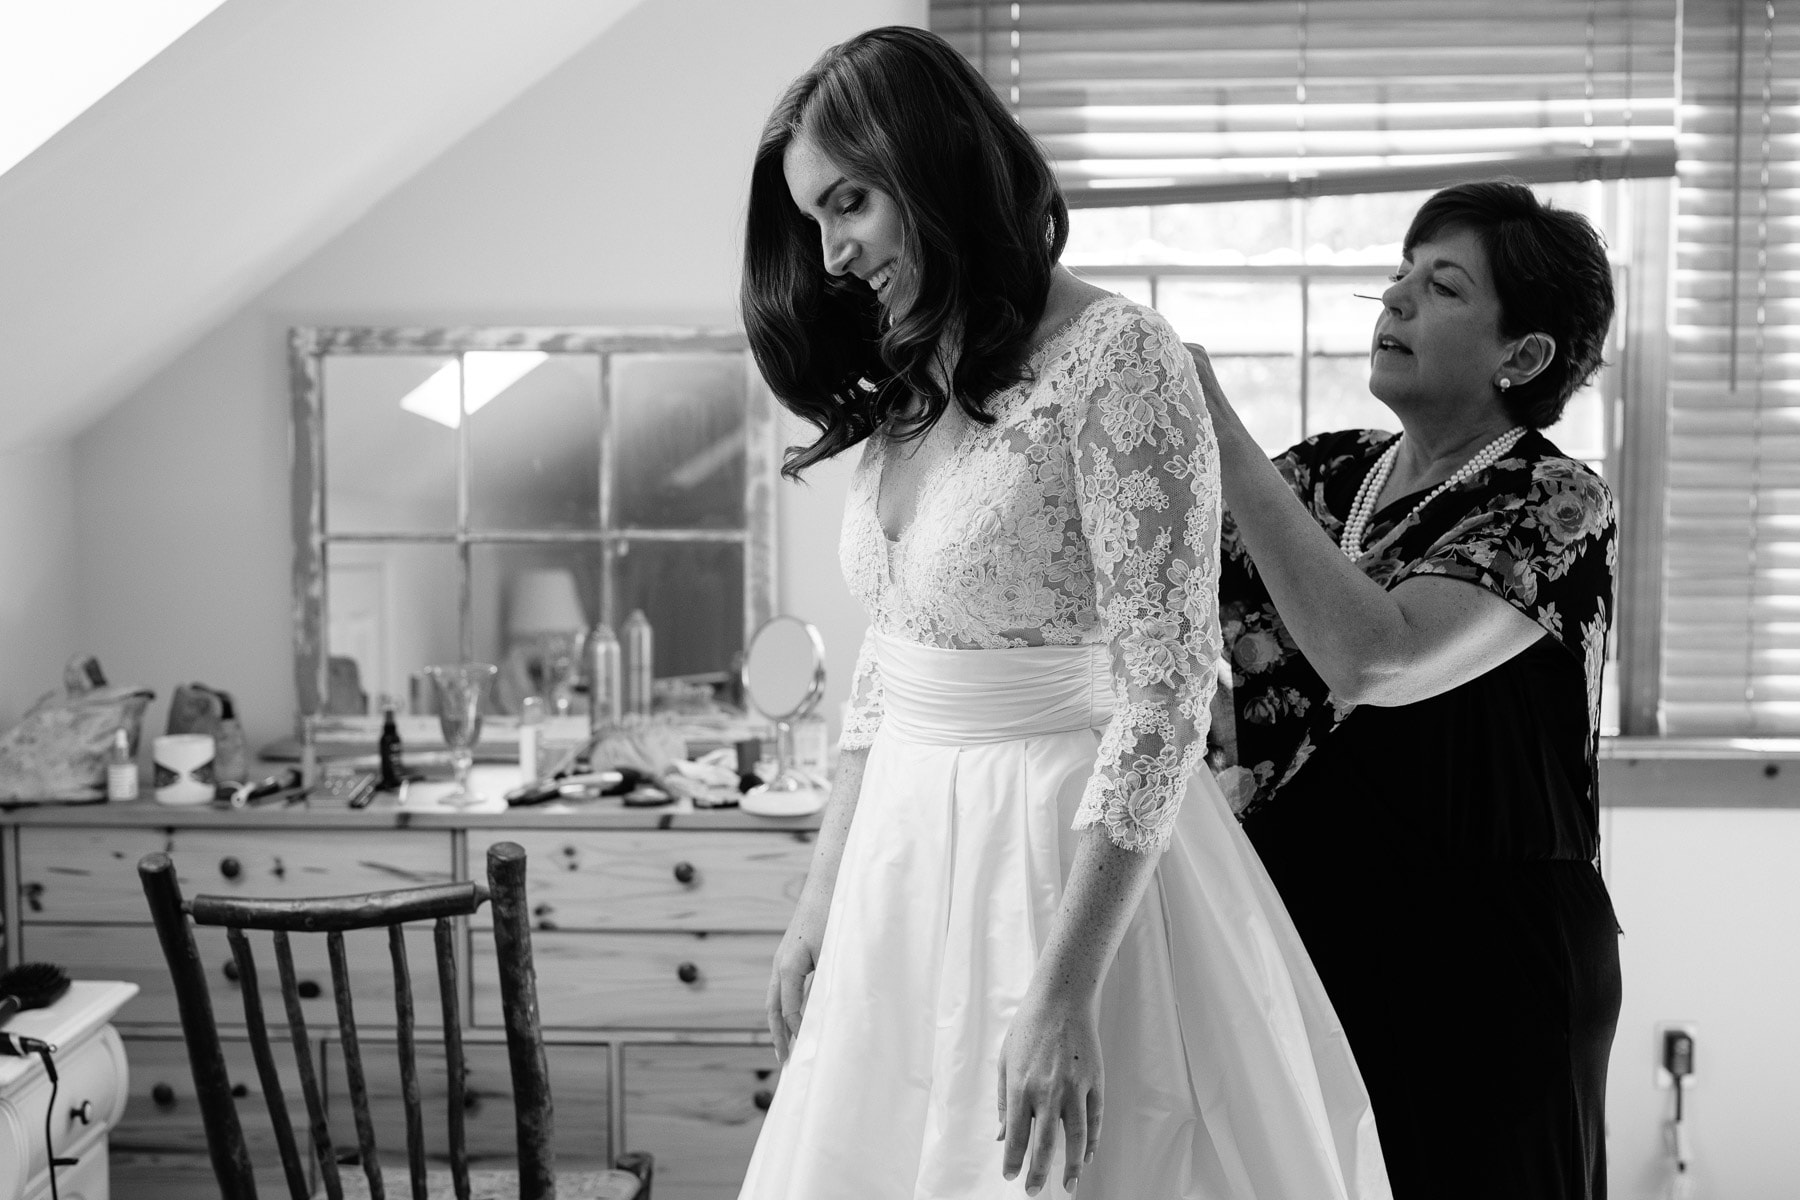 mother buttons her daughter into wedding dress